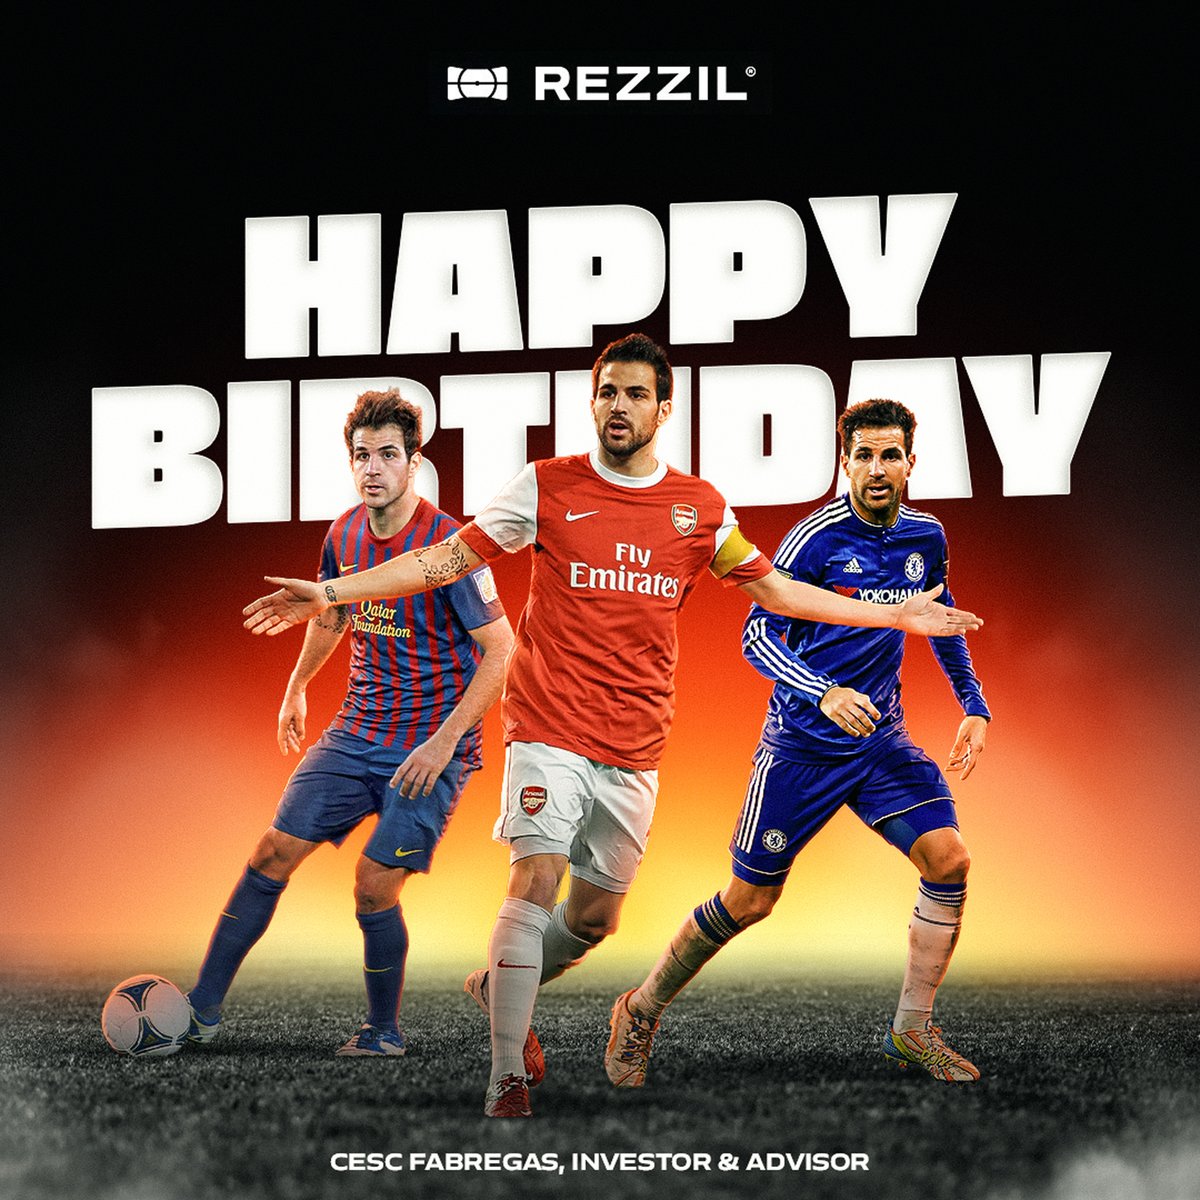 Happy birthday to the midfield magician turned assistant manager @cesc4official! 🪄 We're thrilled to have you in the #RezzilFamily as an investor & advisor. Here's to an amazing year ahead! 🏆